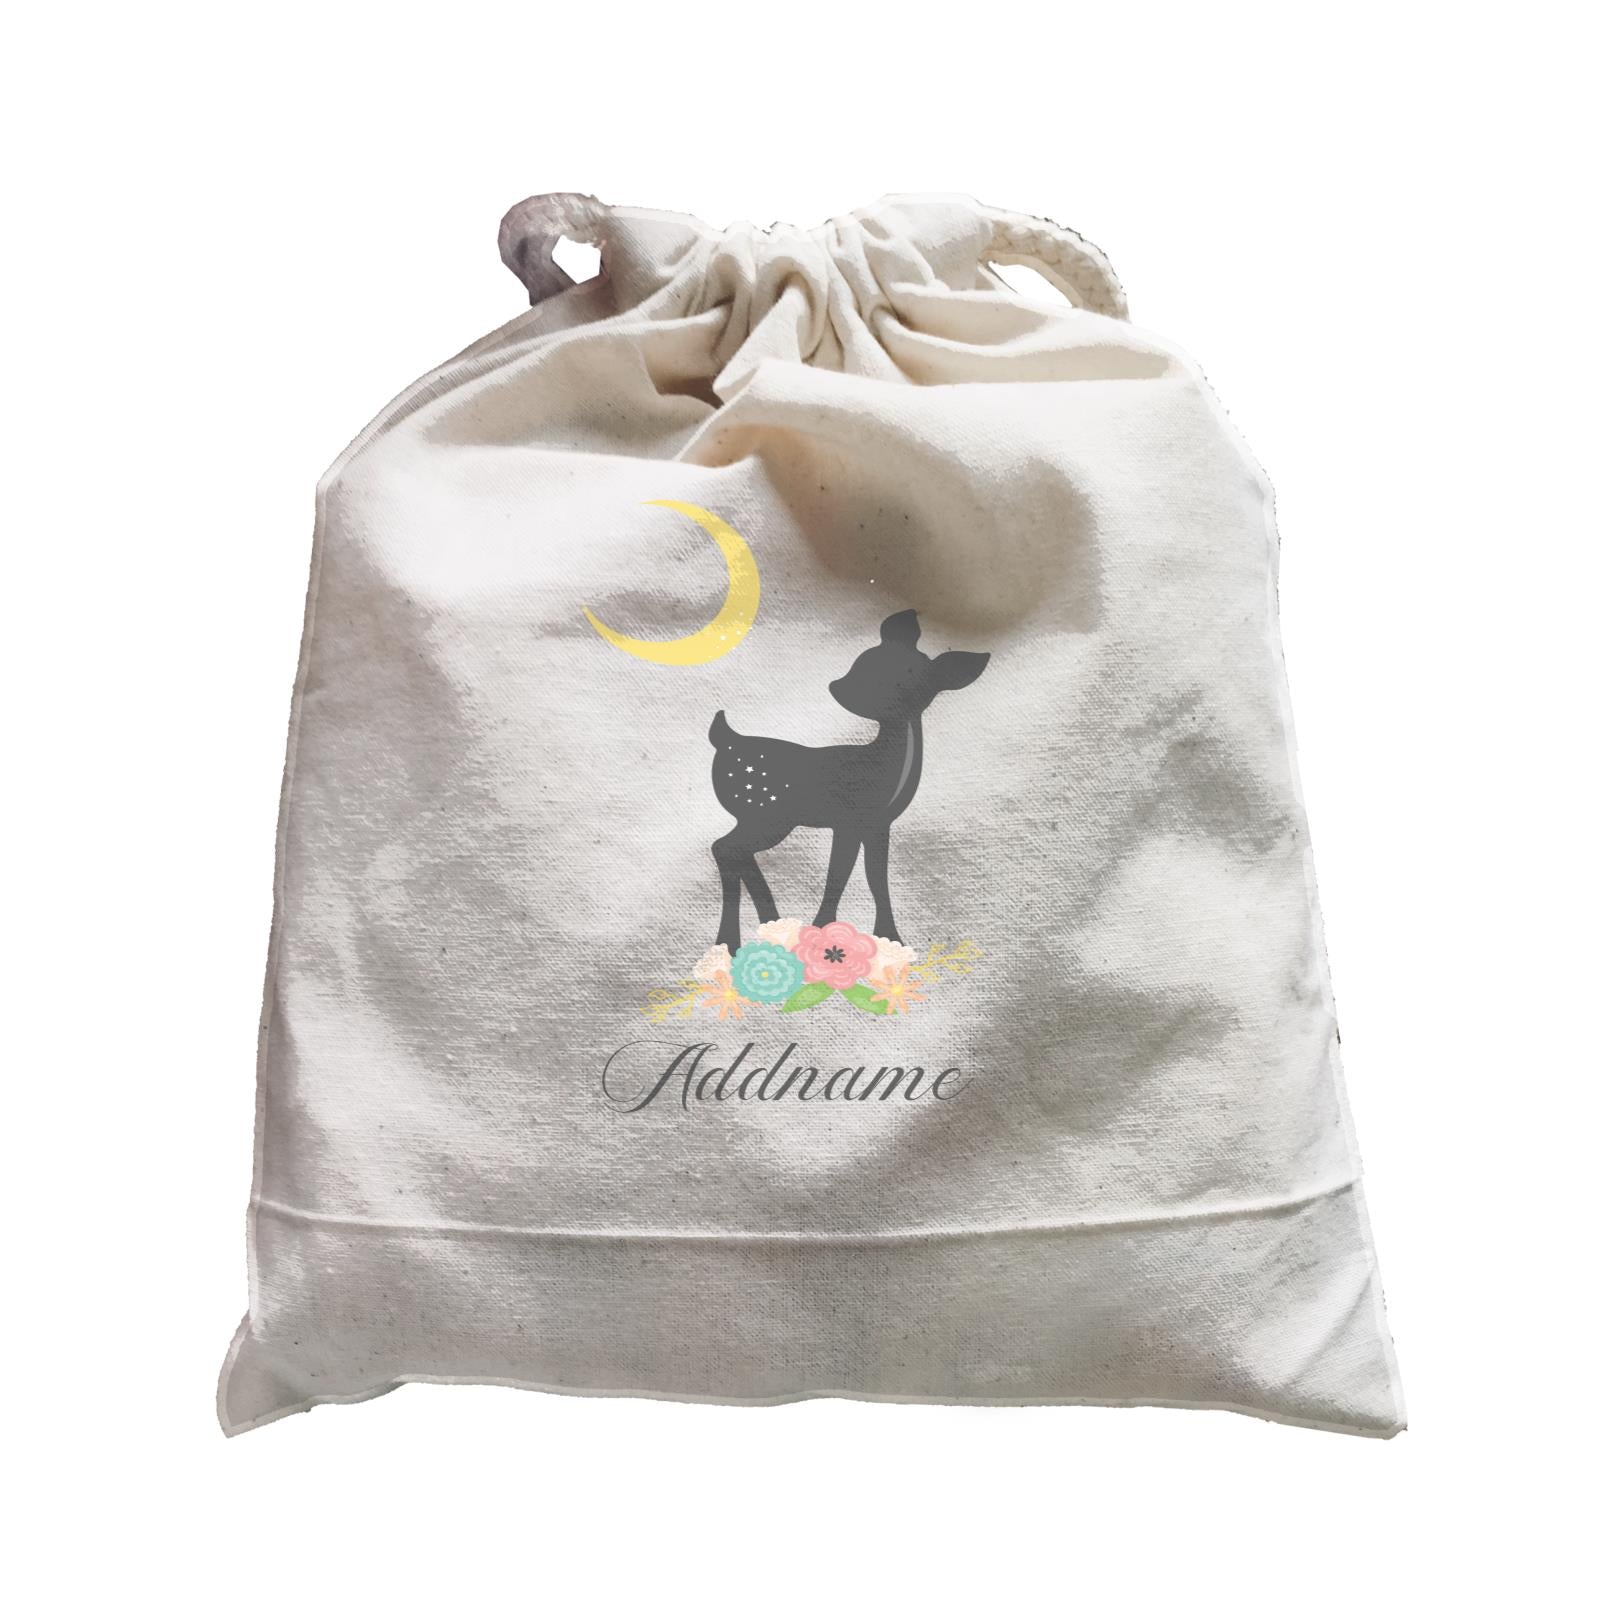 Basic Family Series Pastel Deer Black Fawn With Flower Addname Satchel